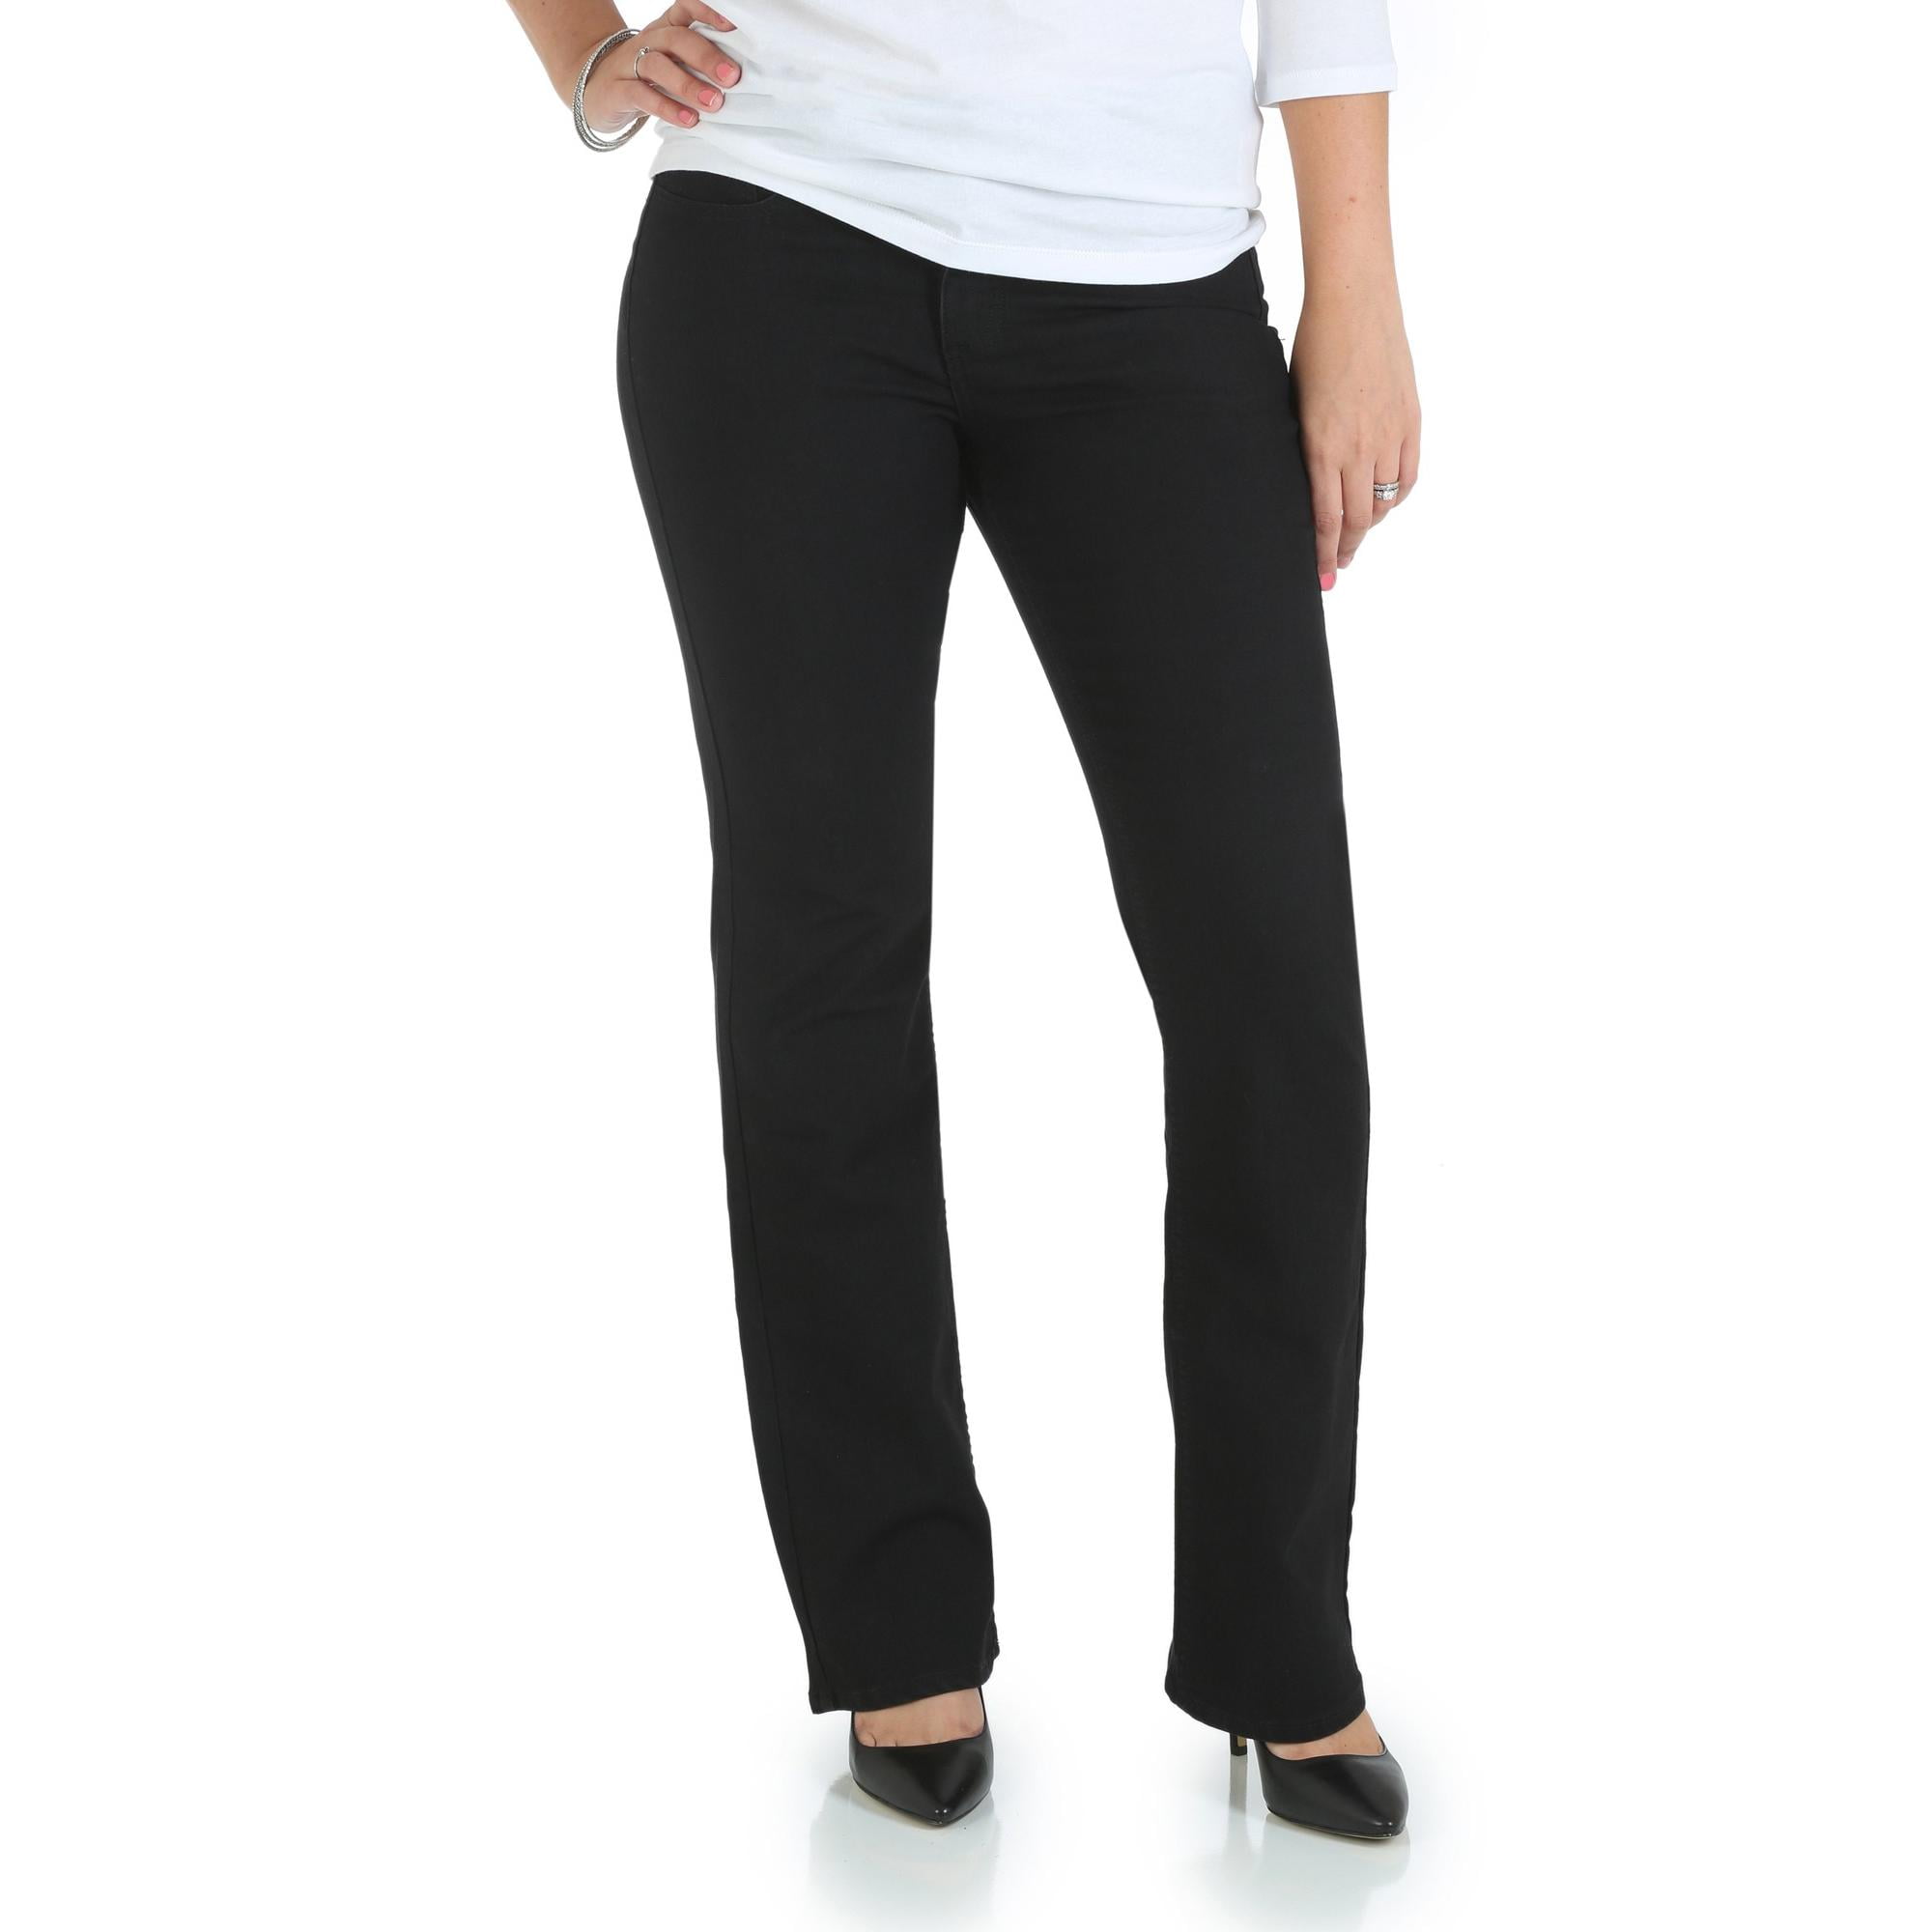 lee classic fit womens jeans